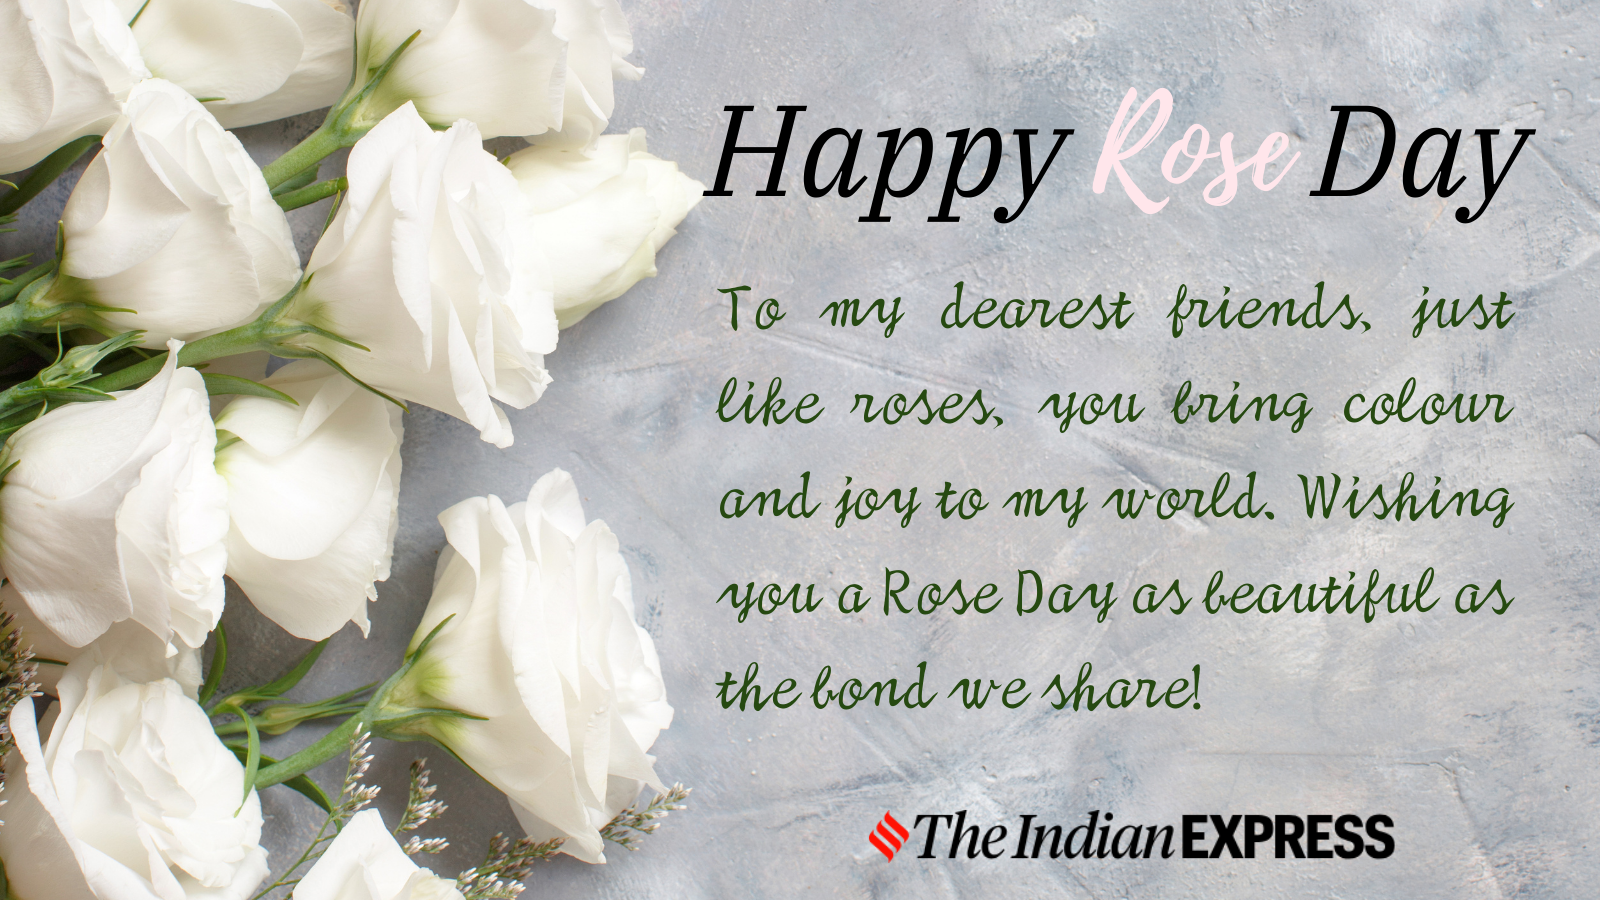 Rose Day Pics, Rose Day Image Gallery, Rose Day Photos & Rose Day FB Covers  1